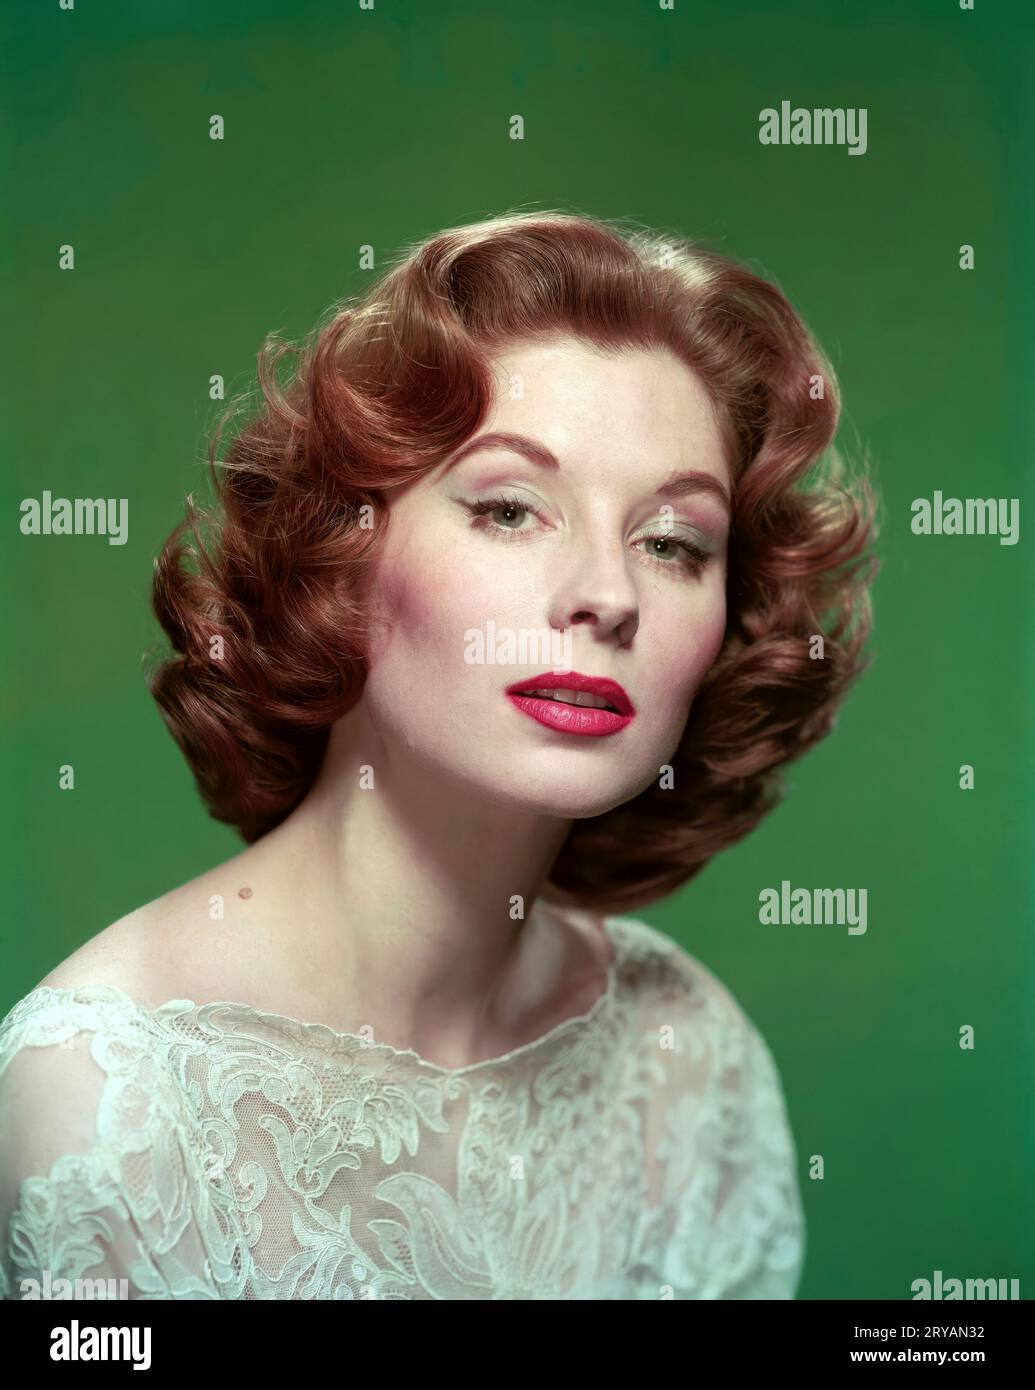 SUZY PARKER in TEN NORTH FREDERICK (1958), directed by PHILIP DUNNE. Credit: 20TH CENTURY FOX / Album Stock Photo